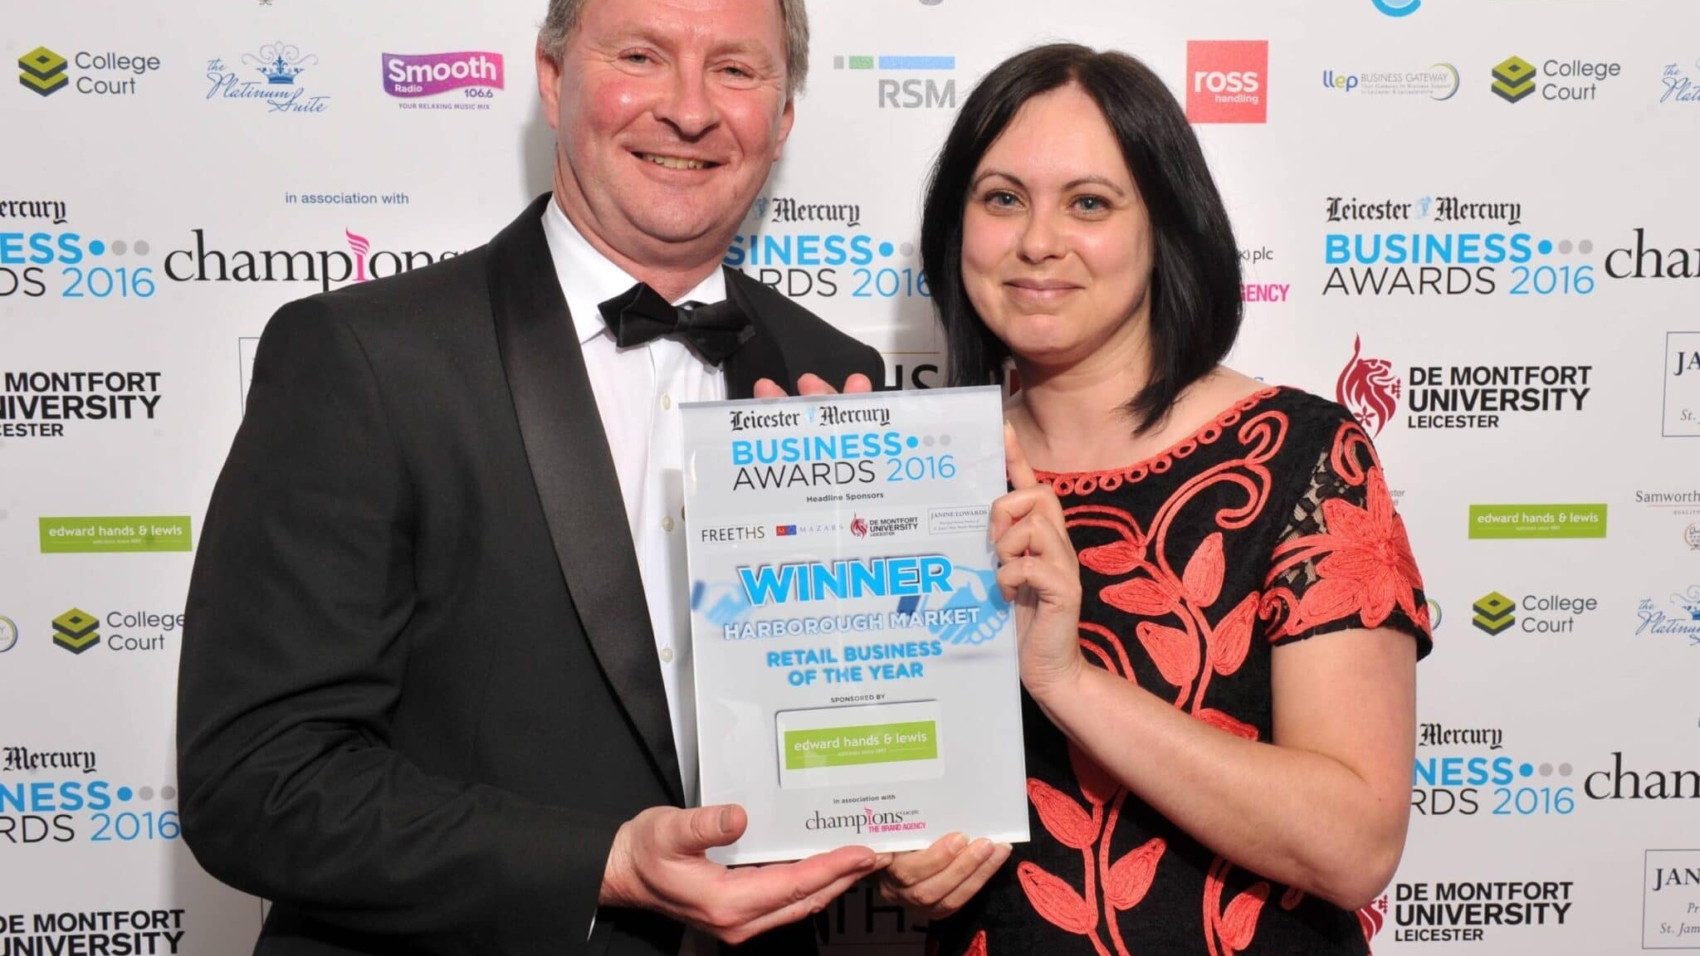 LEICESTER MERCURY BUSINESS AWARDS 2016, held at The Platinum Suite, Cobden Street, Leicester - RETAIL BUSINESS OF THE YEAR - Harborough Market - Sairah Butt and Nick Rhodes
Reporter - Isobel Frodsham / Tom Pegden  PICTURE WILL JOHNSTON